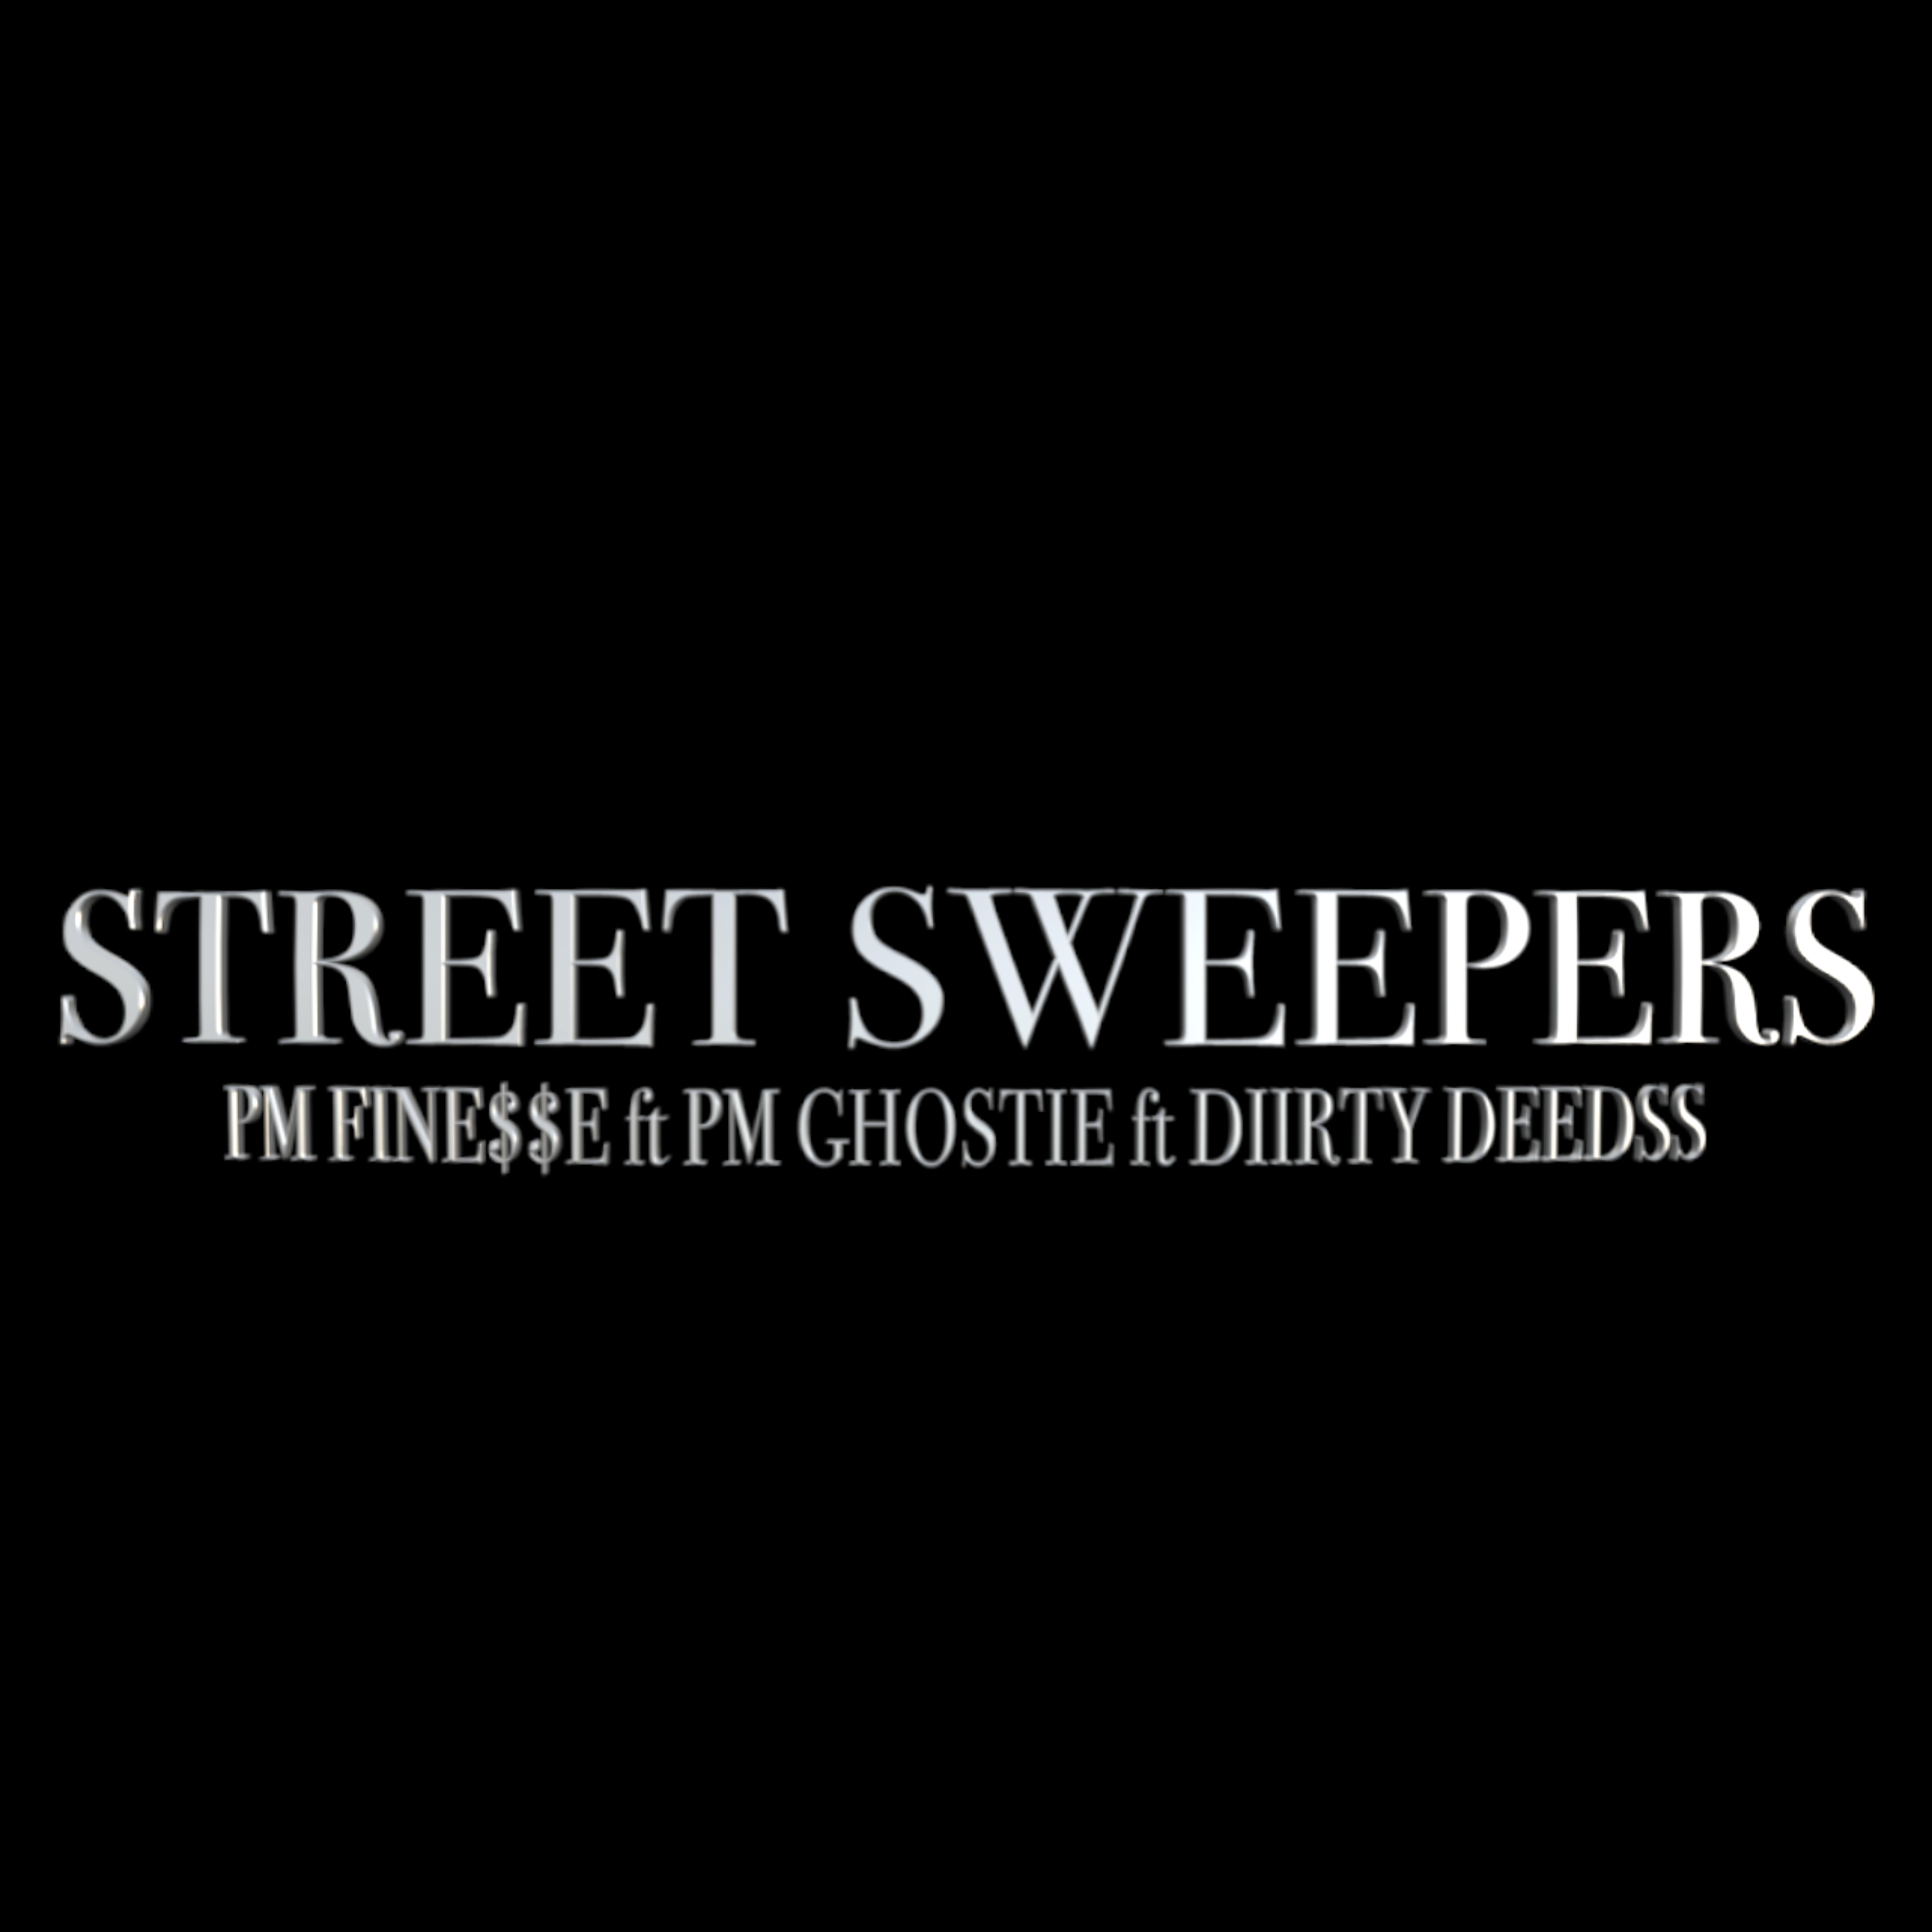 PM FINE$$E - Street Sweepers